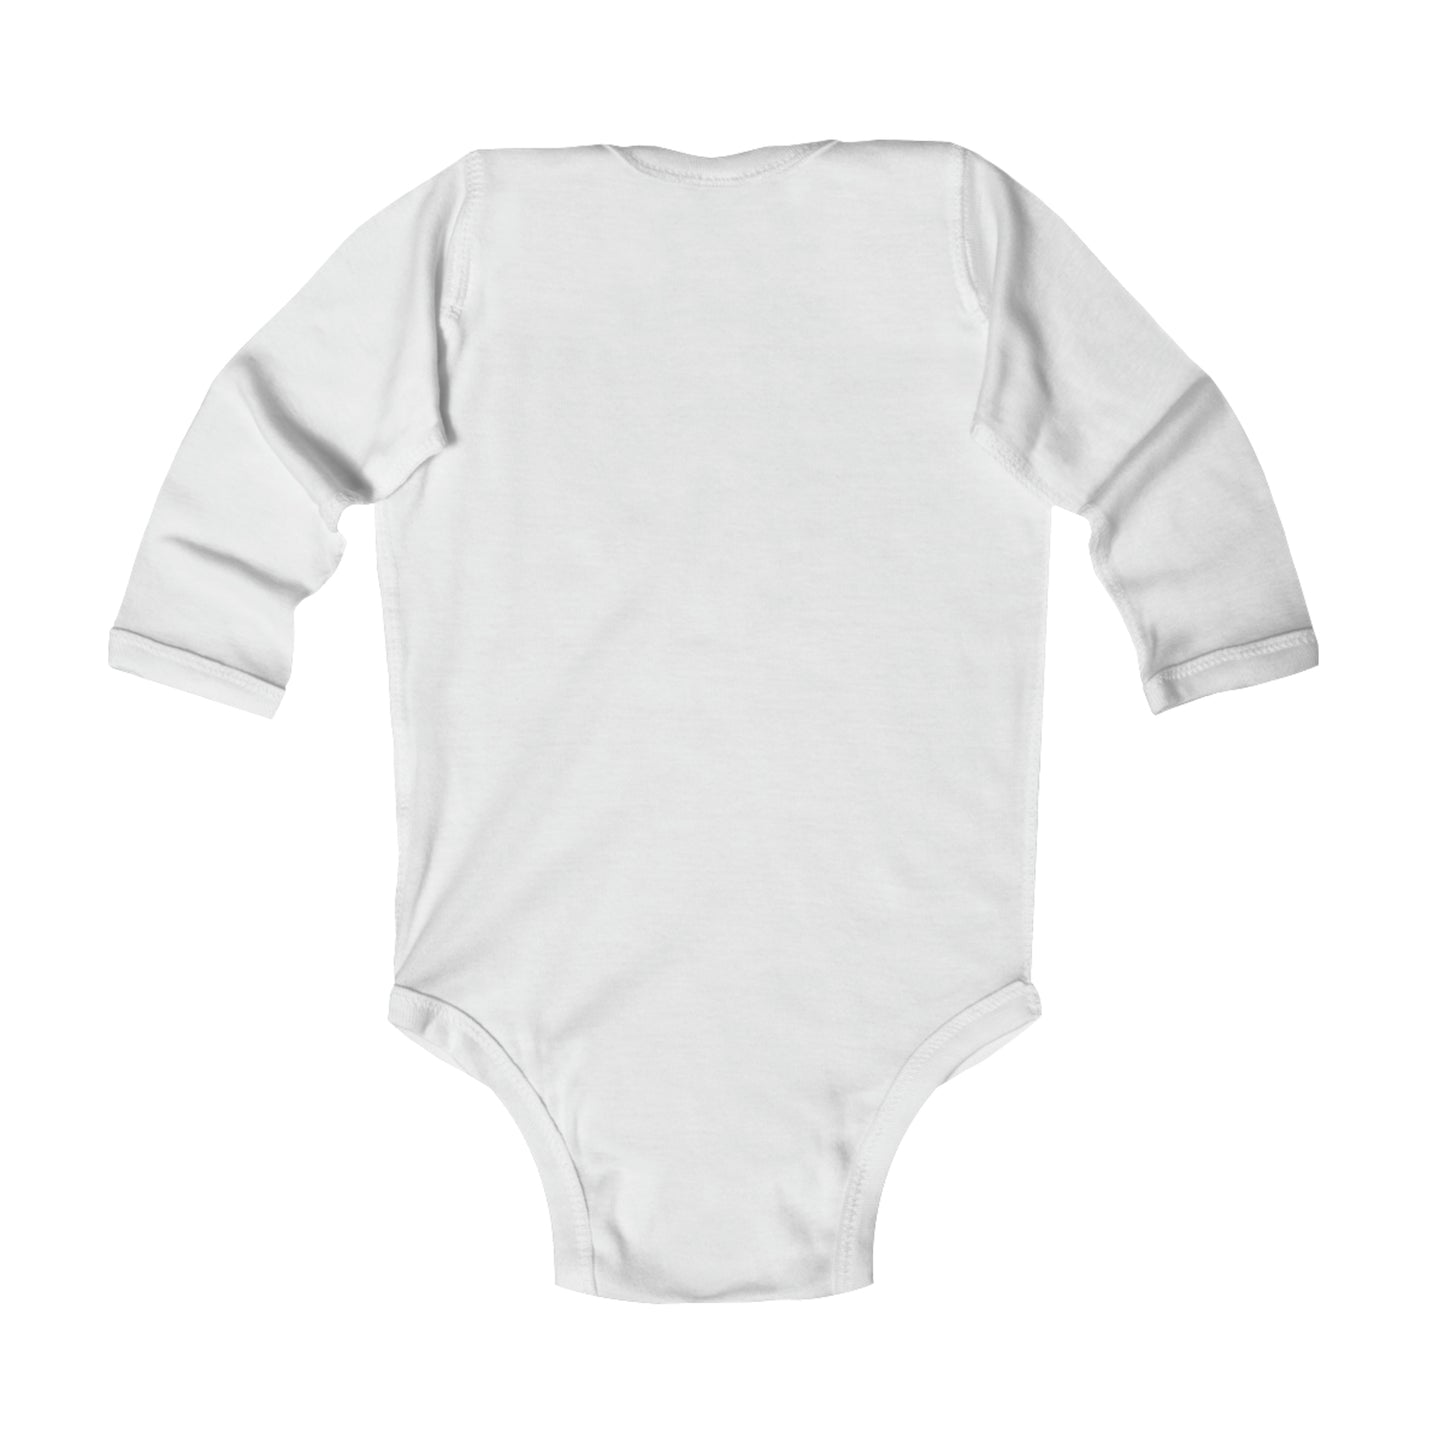 Gifts of Cheer Infant Long Sleeve Bodysuit